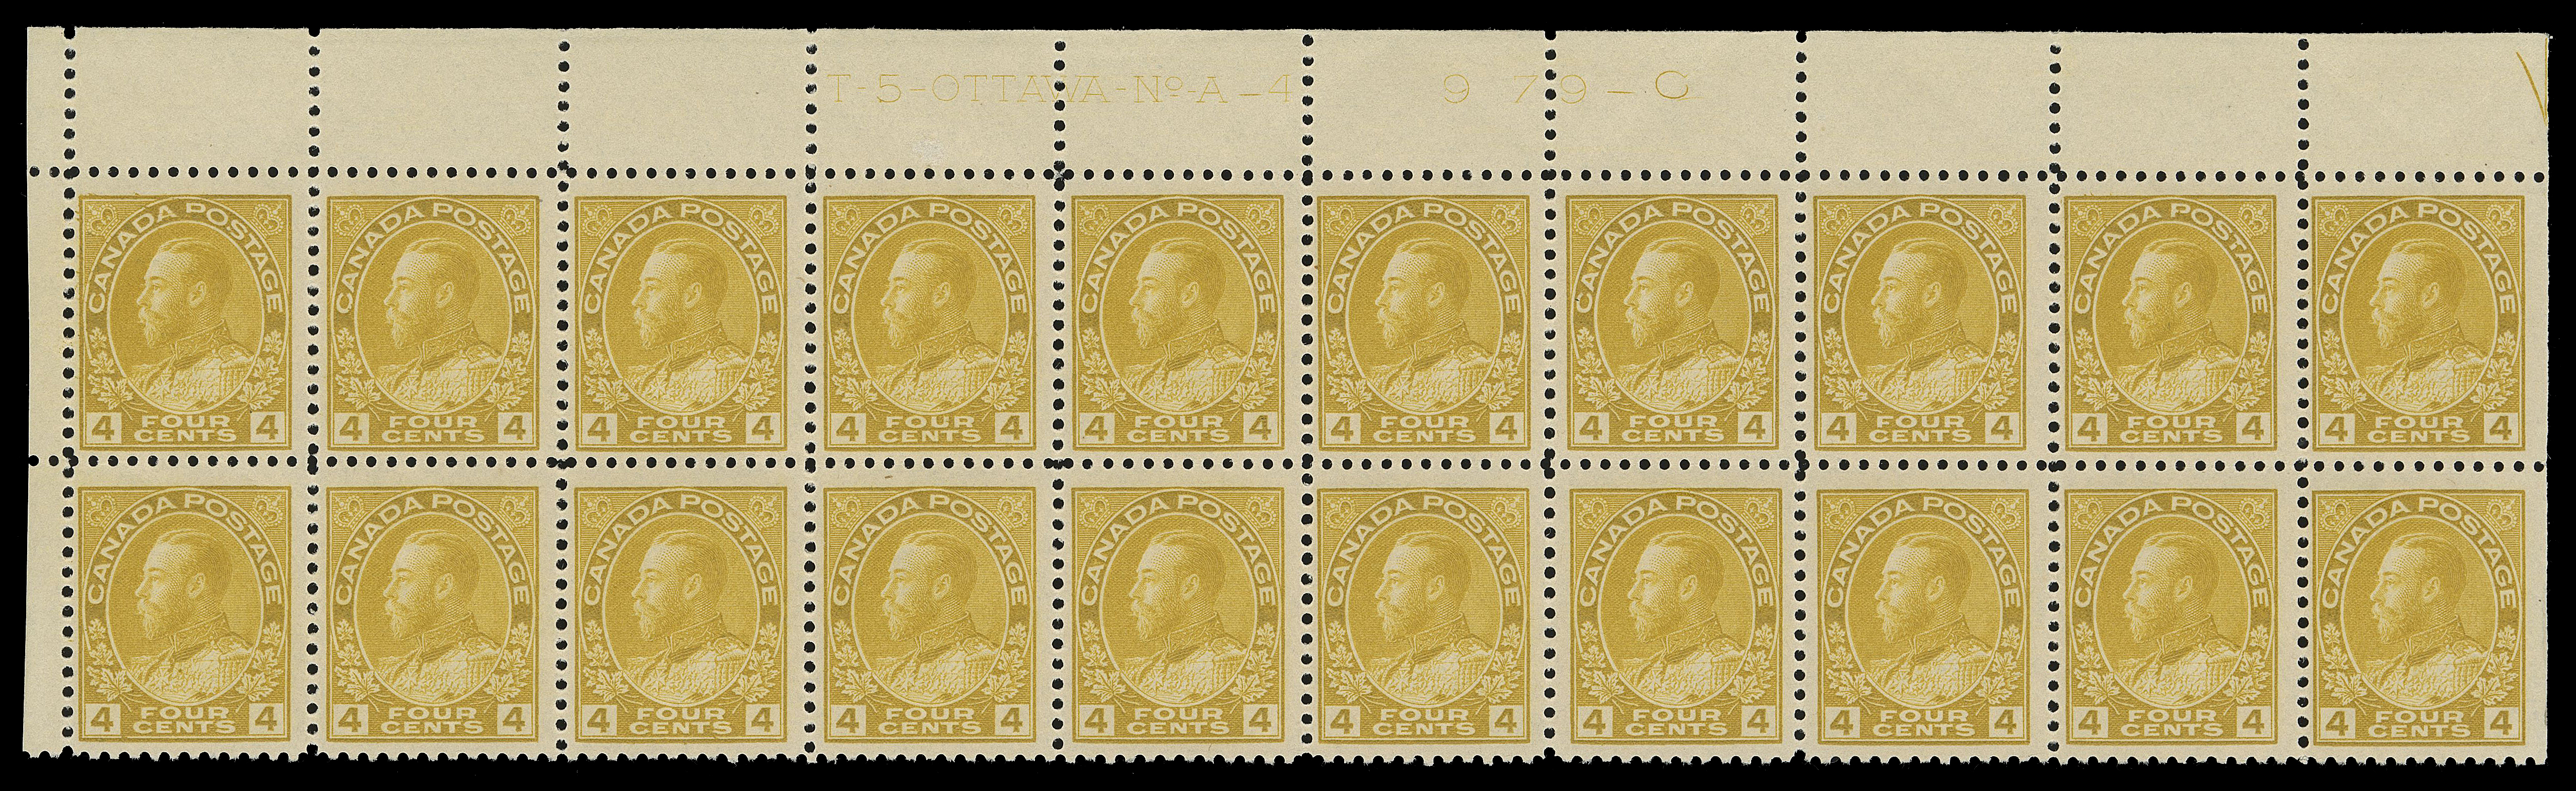 ADMIRAL STAMPS  110b,An impressive upper left Plate 4 block of twenty with radiant colour, reasonably centered, straight edged stamps LH leaving eighteen with pristine NH original gum. An exceptionally fresh plate block, rare and the largest recorded four cent Plate 4 multiple in the Glen Lundeen census on the BNAPS website, F-VF (Unitrade cat. $3,370)

Provenance: C.M. Jephcott, Maresch Sale 241, June 1990; Lot 776